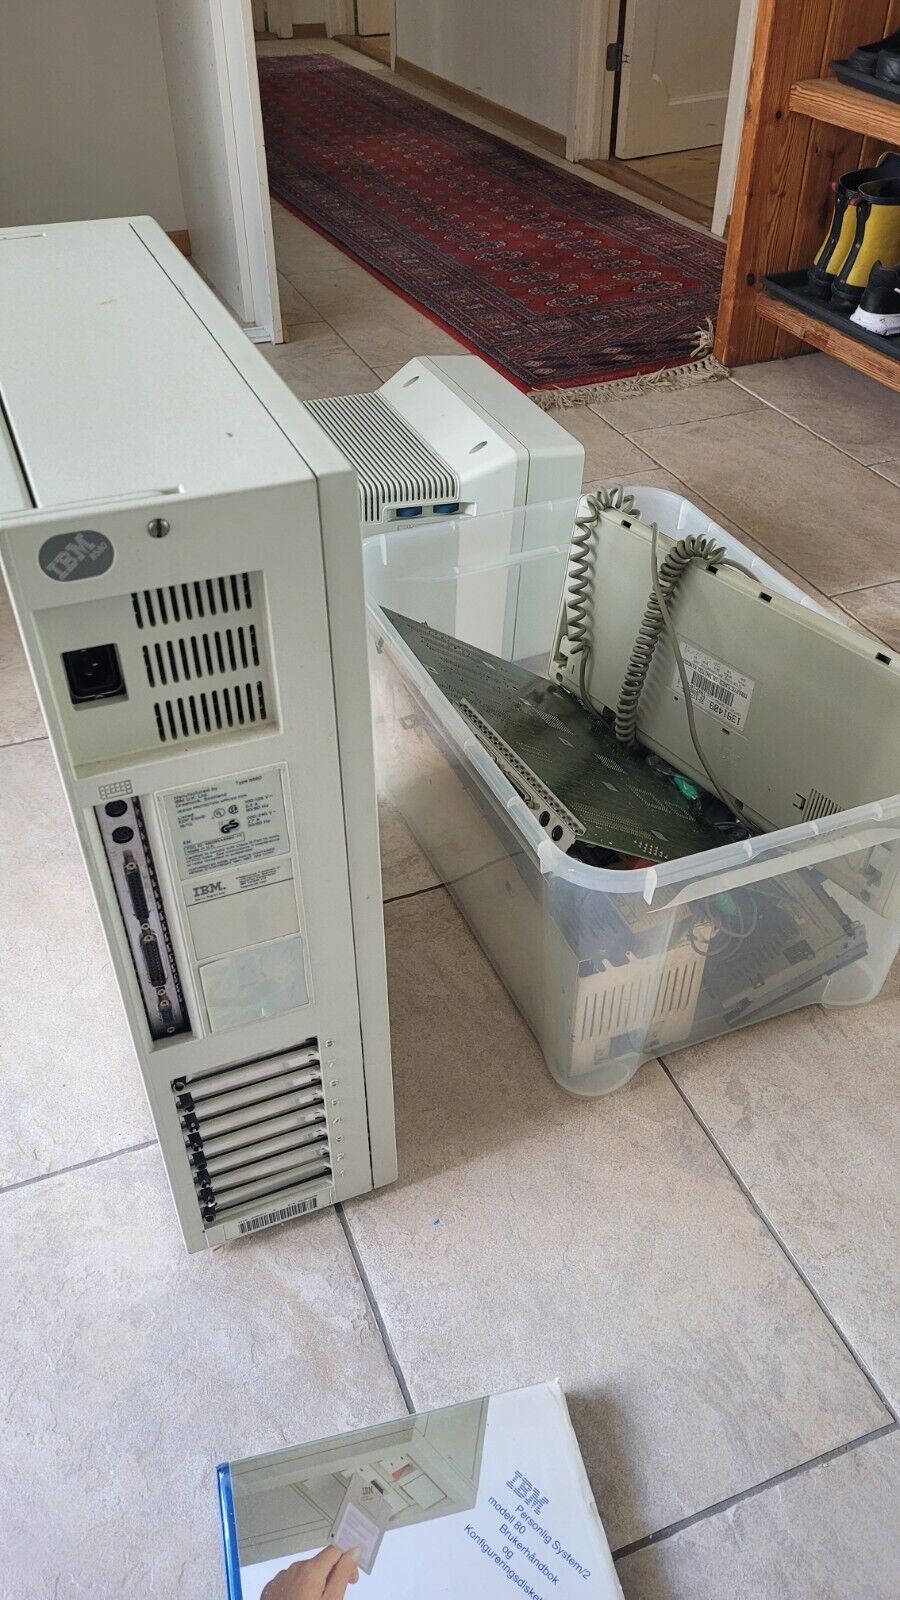 Vintage IBM Personal System/2 Model 80 with spare parts